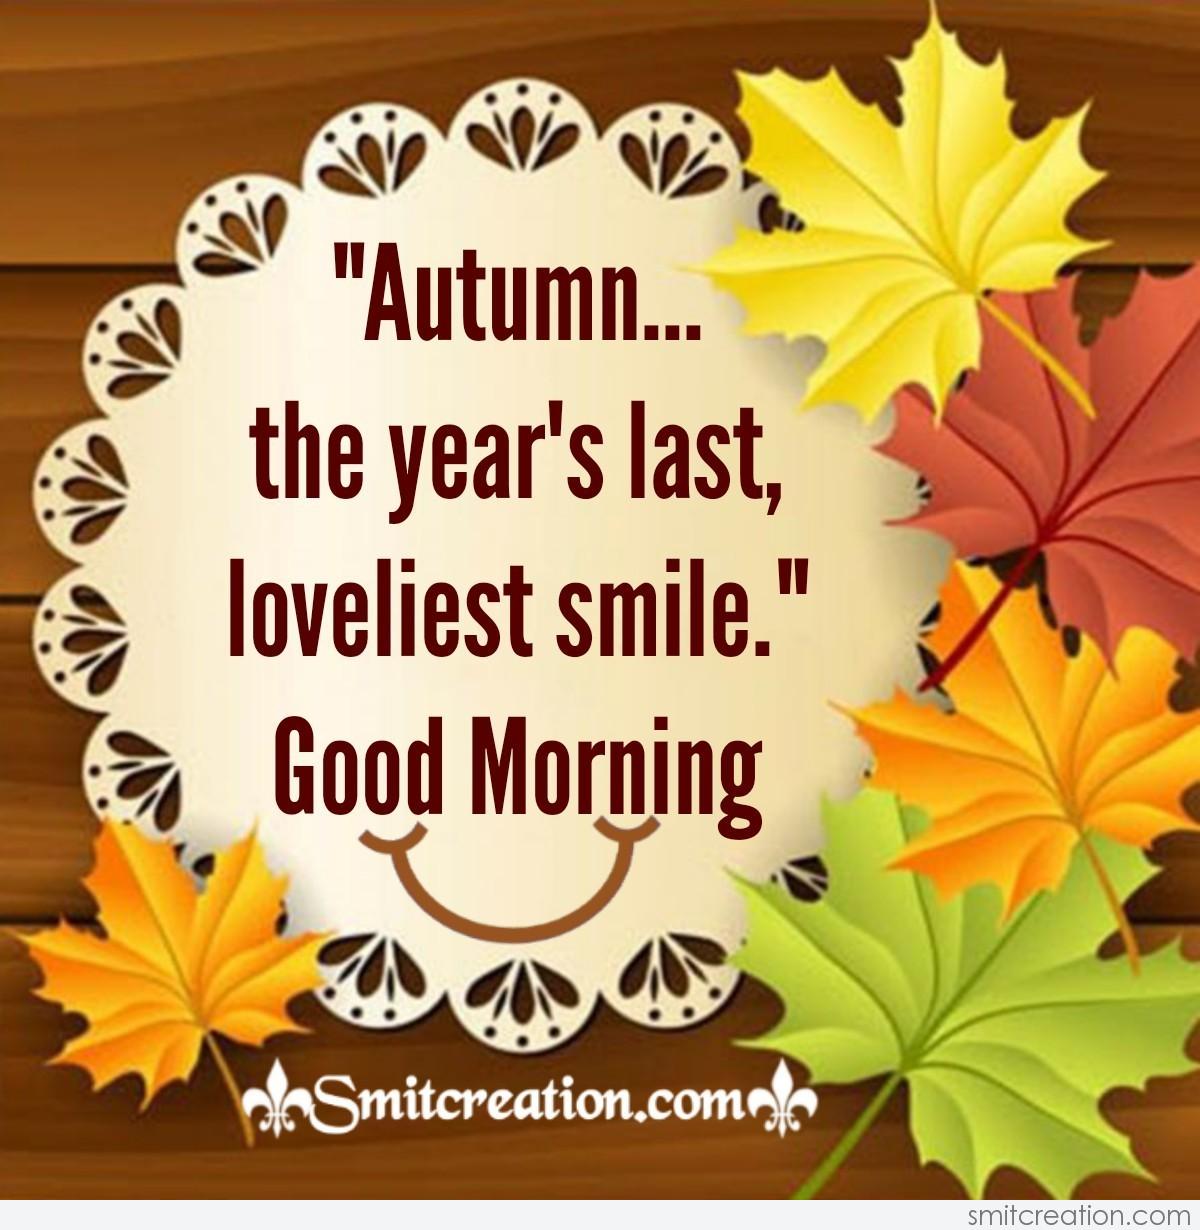 Good Morning Autumn Love Quotes